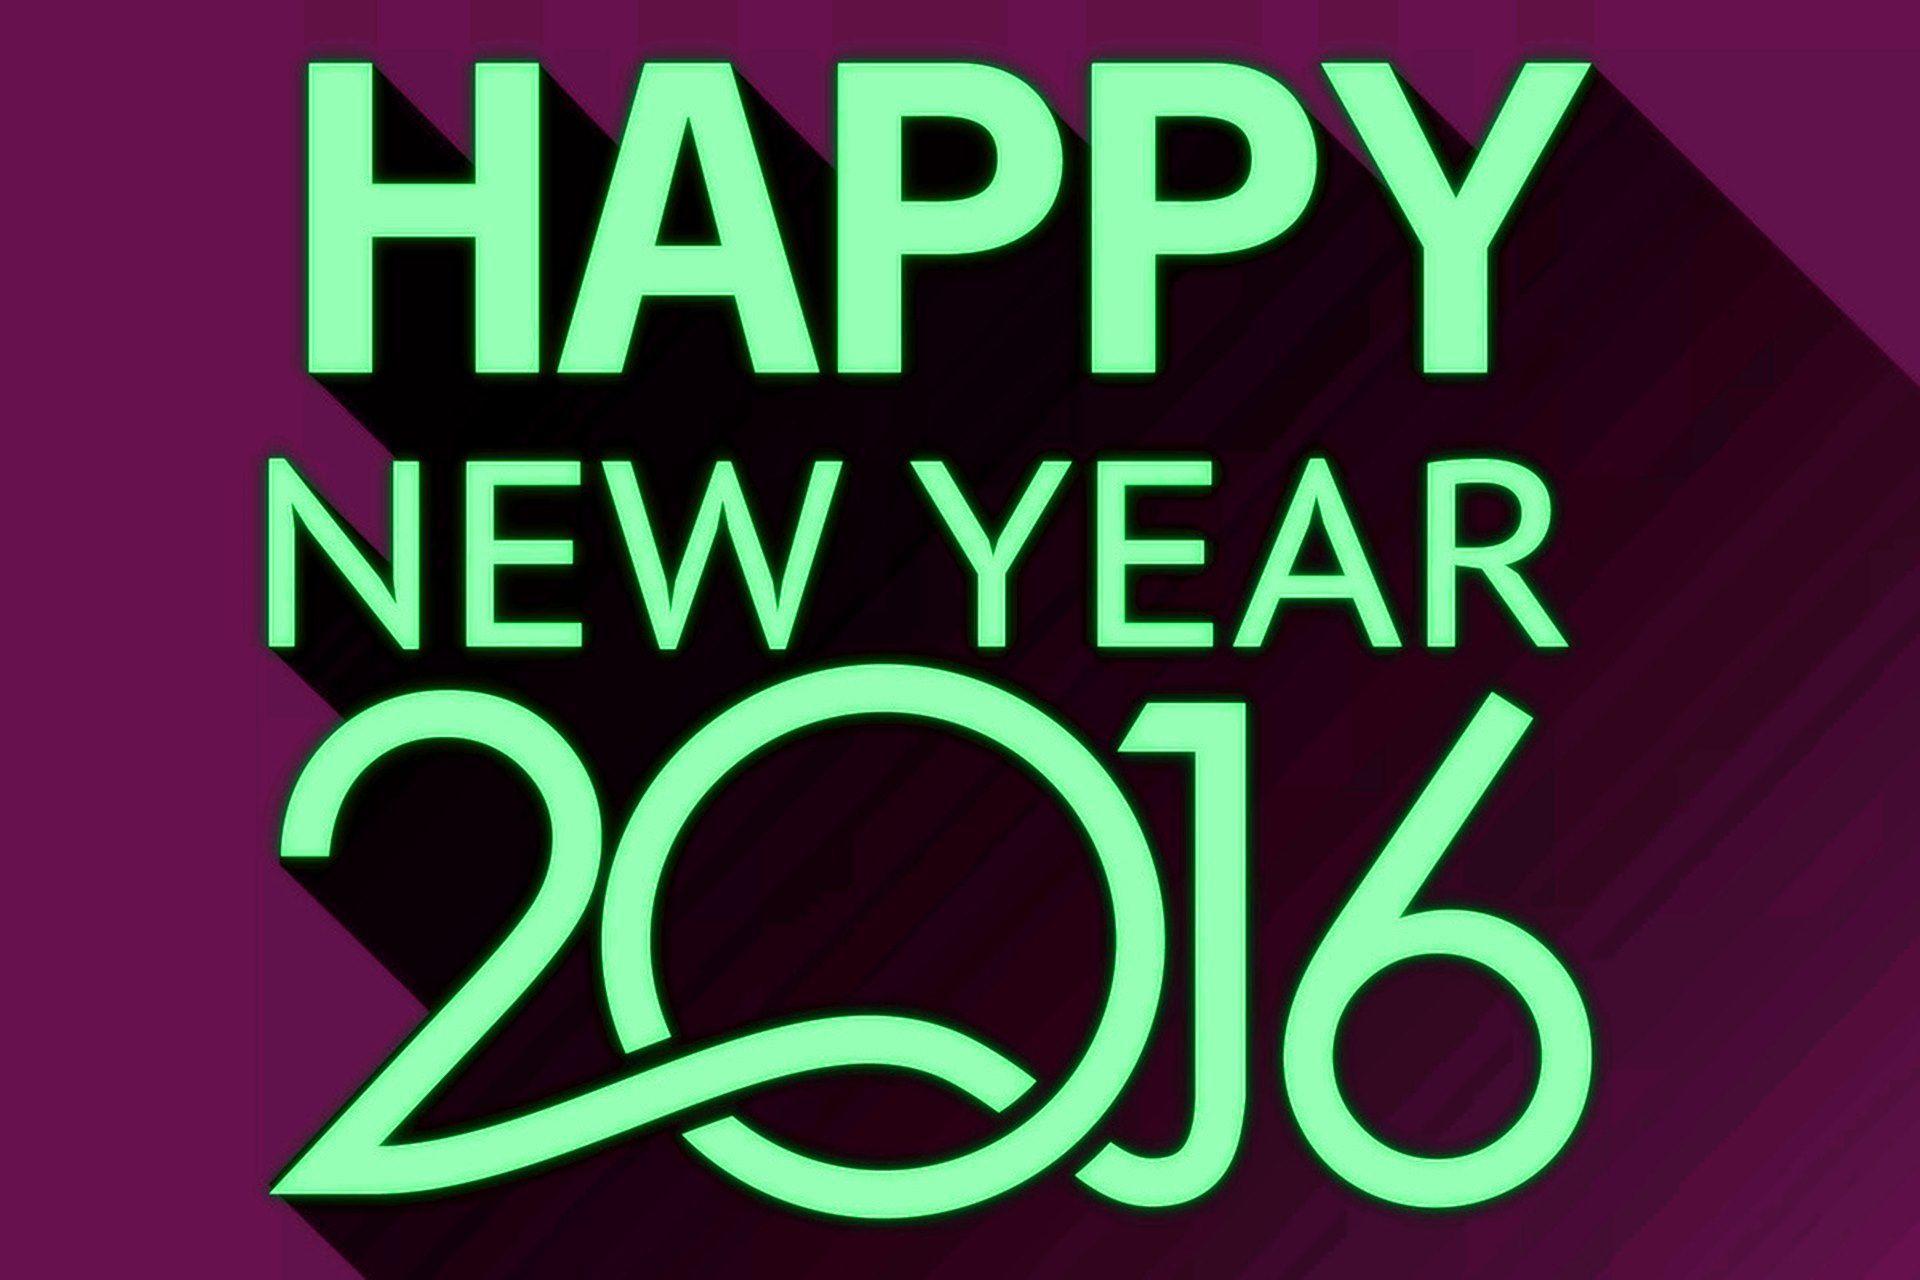 Happy New Year 2016 Free Download Latest Picture And Messages